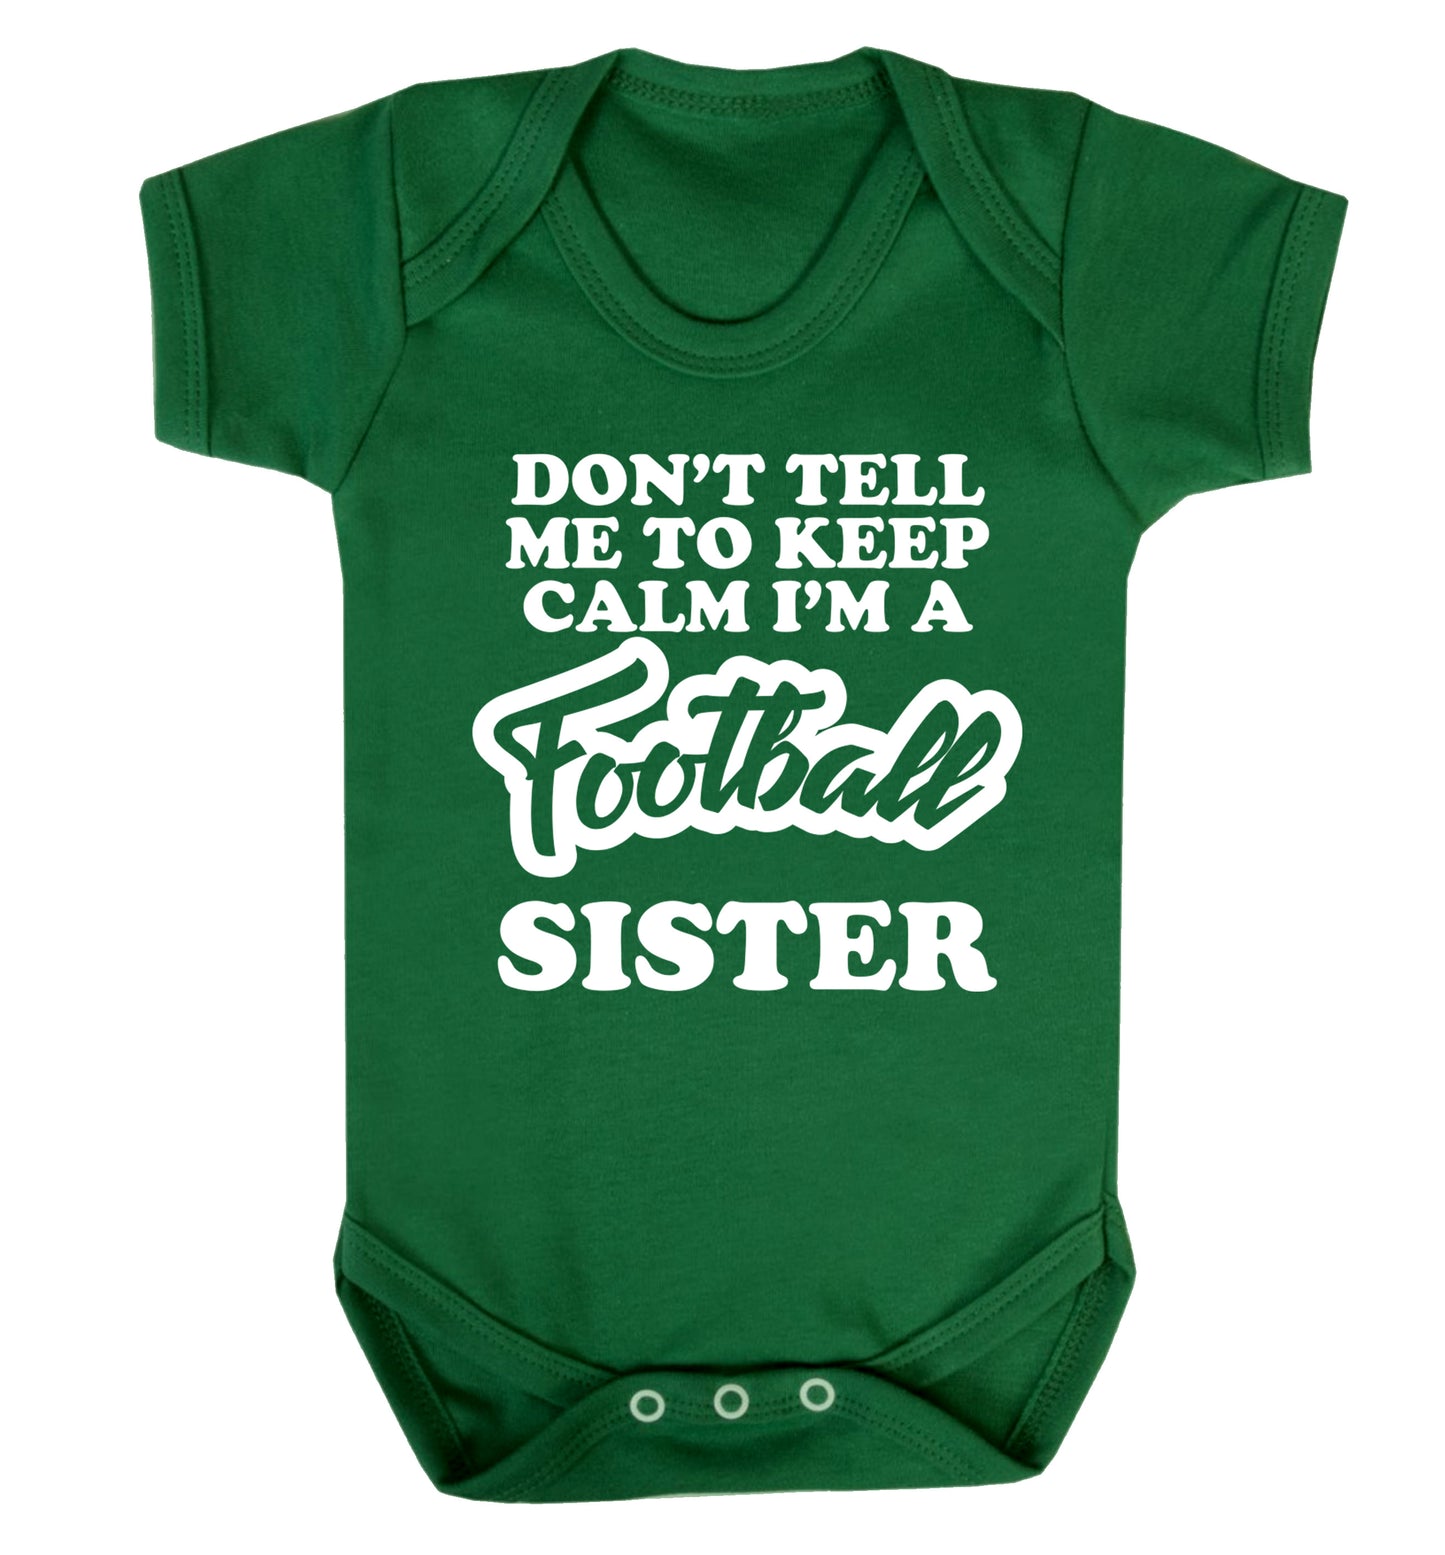 Don't tell me to keep calm I'm a football sister Baby Vest green 18-24 months